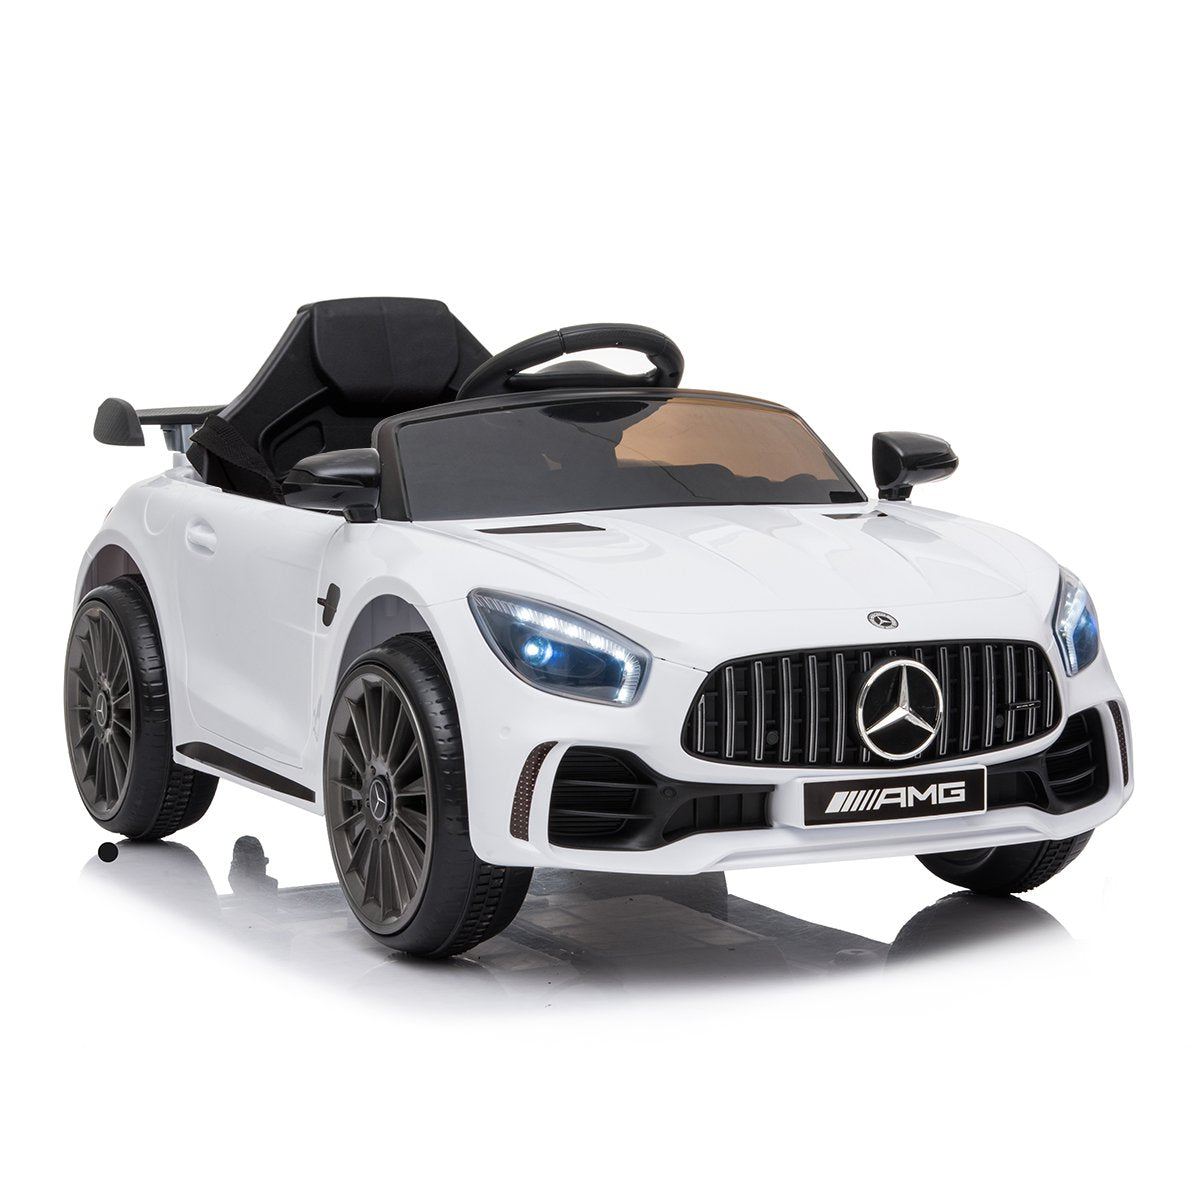 Kahuna Mercedes Benz Licensed Kids Electric Ride On Car Remote Control - White